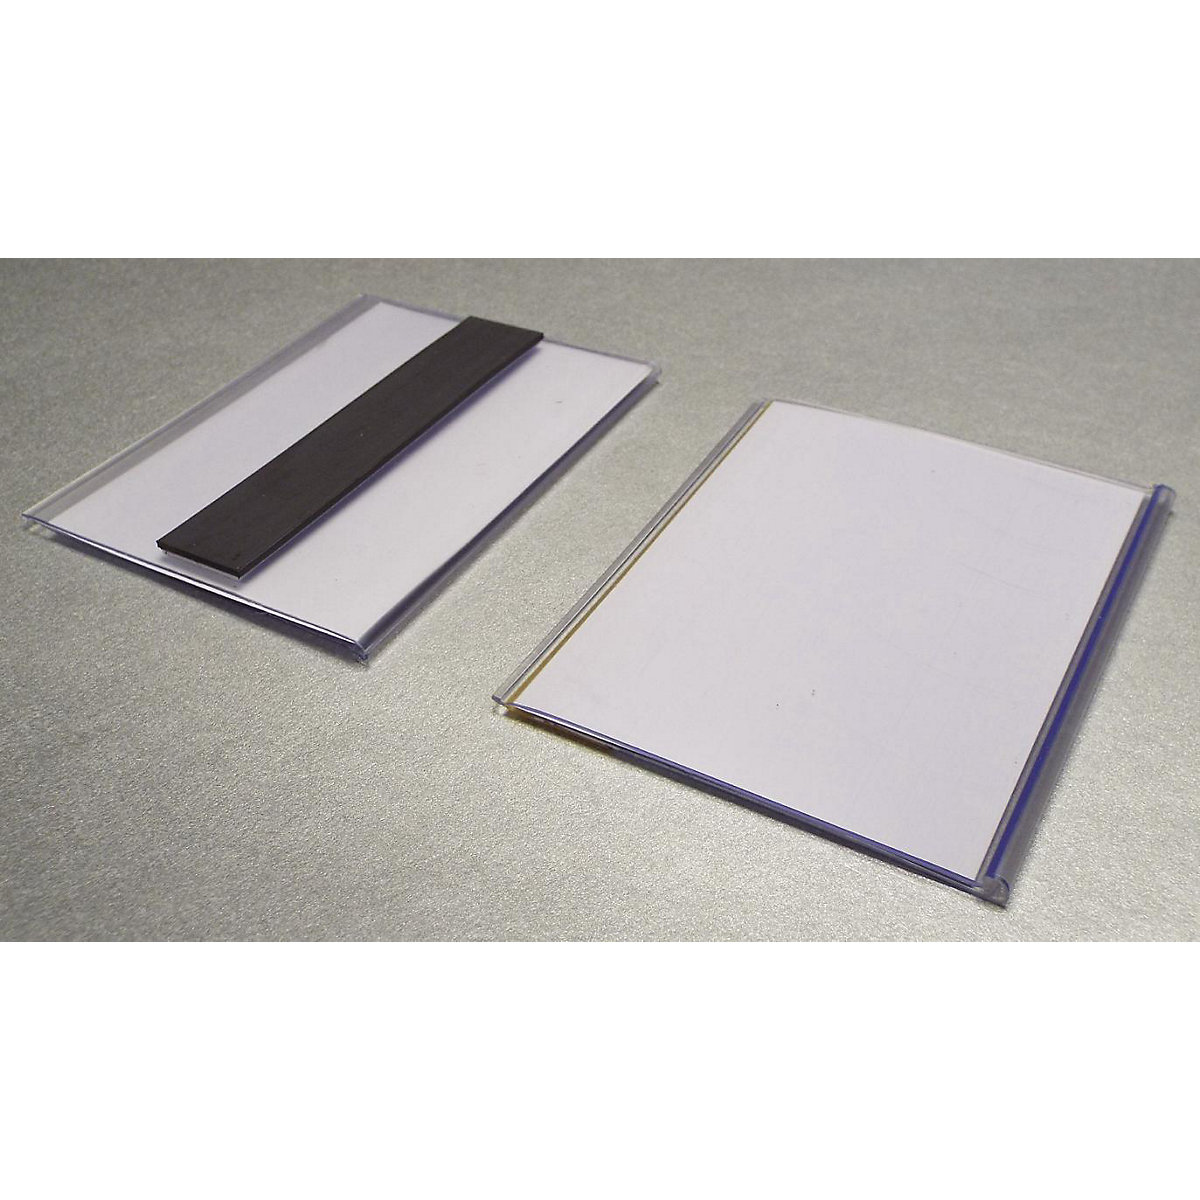 Ticket holders, magnetic, HxW 80 x 100 mm, pack of 100-4